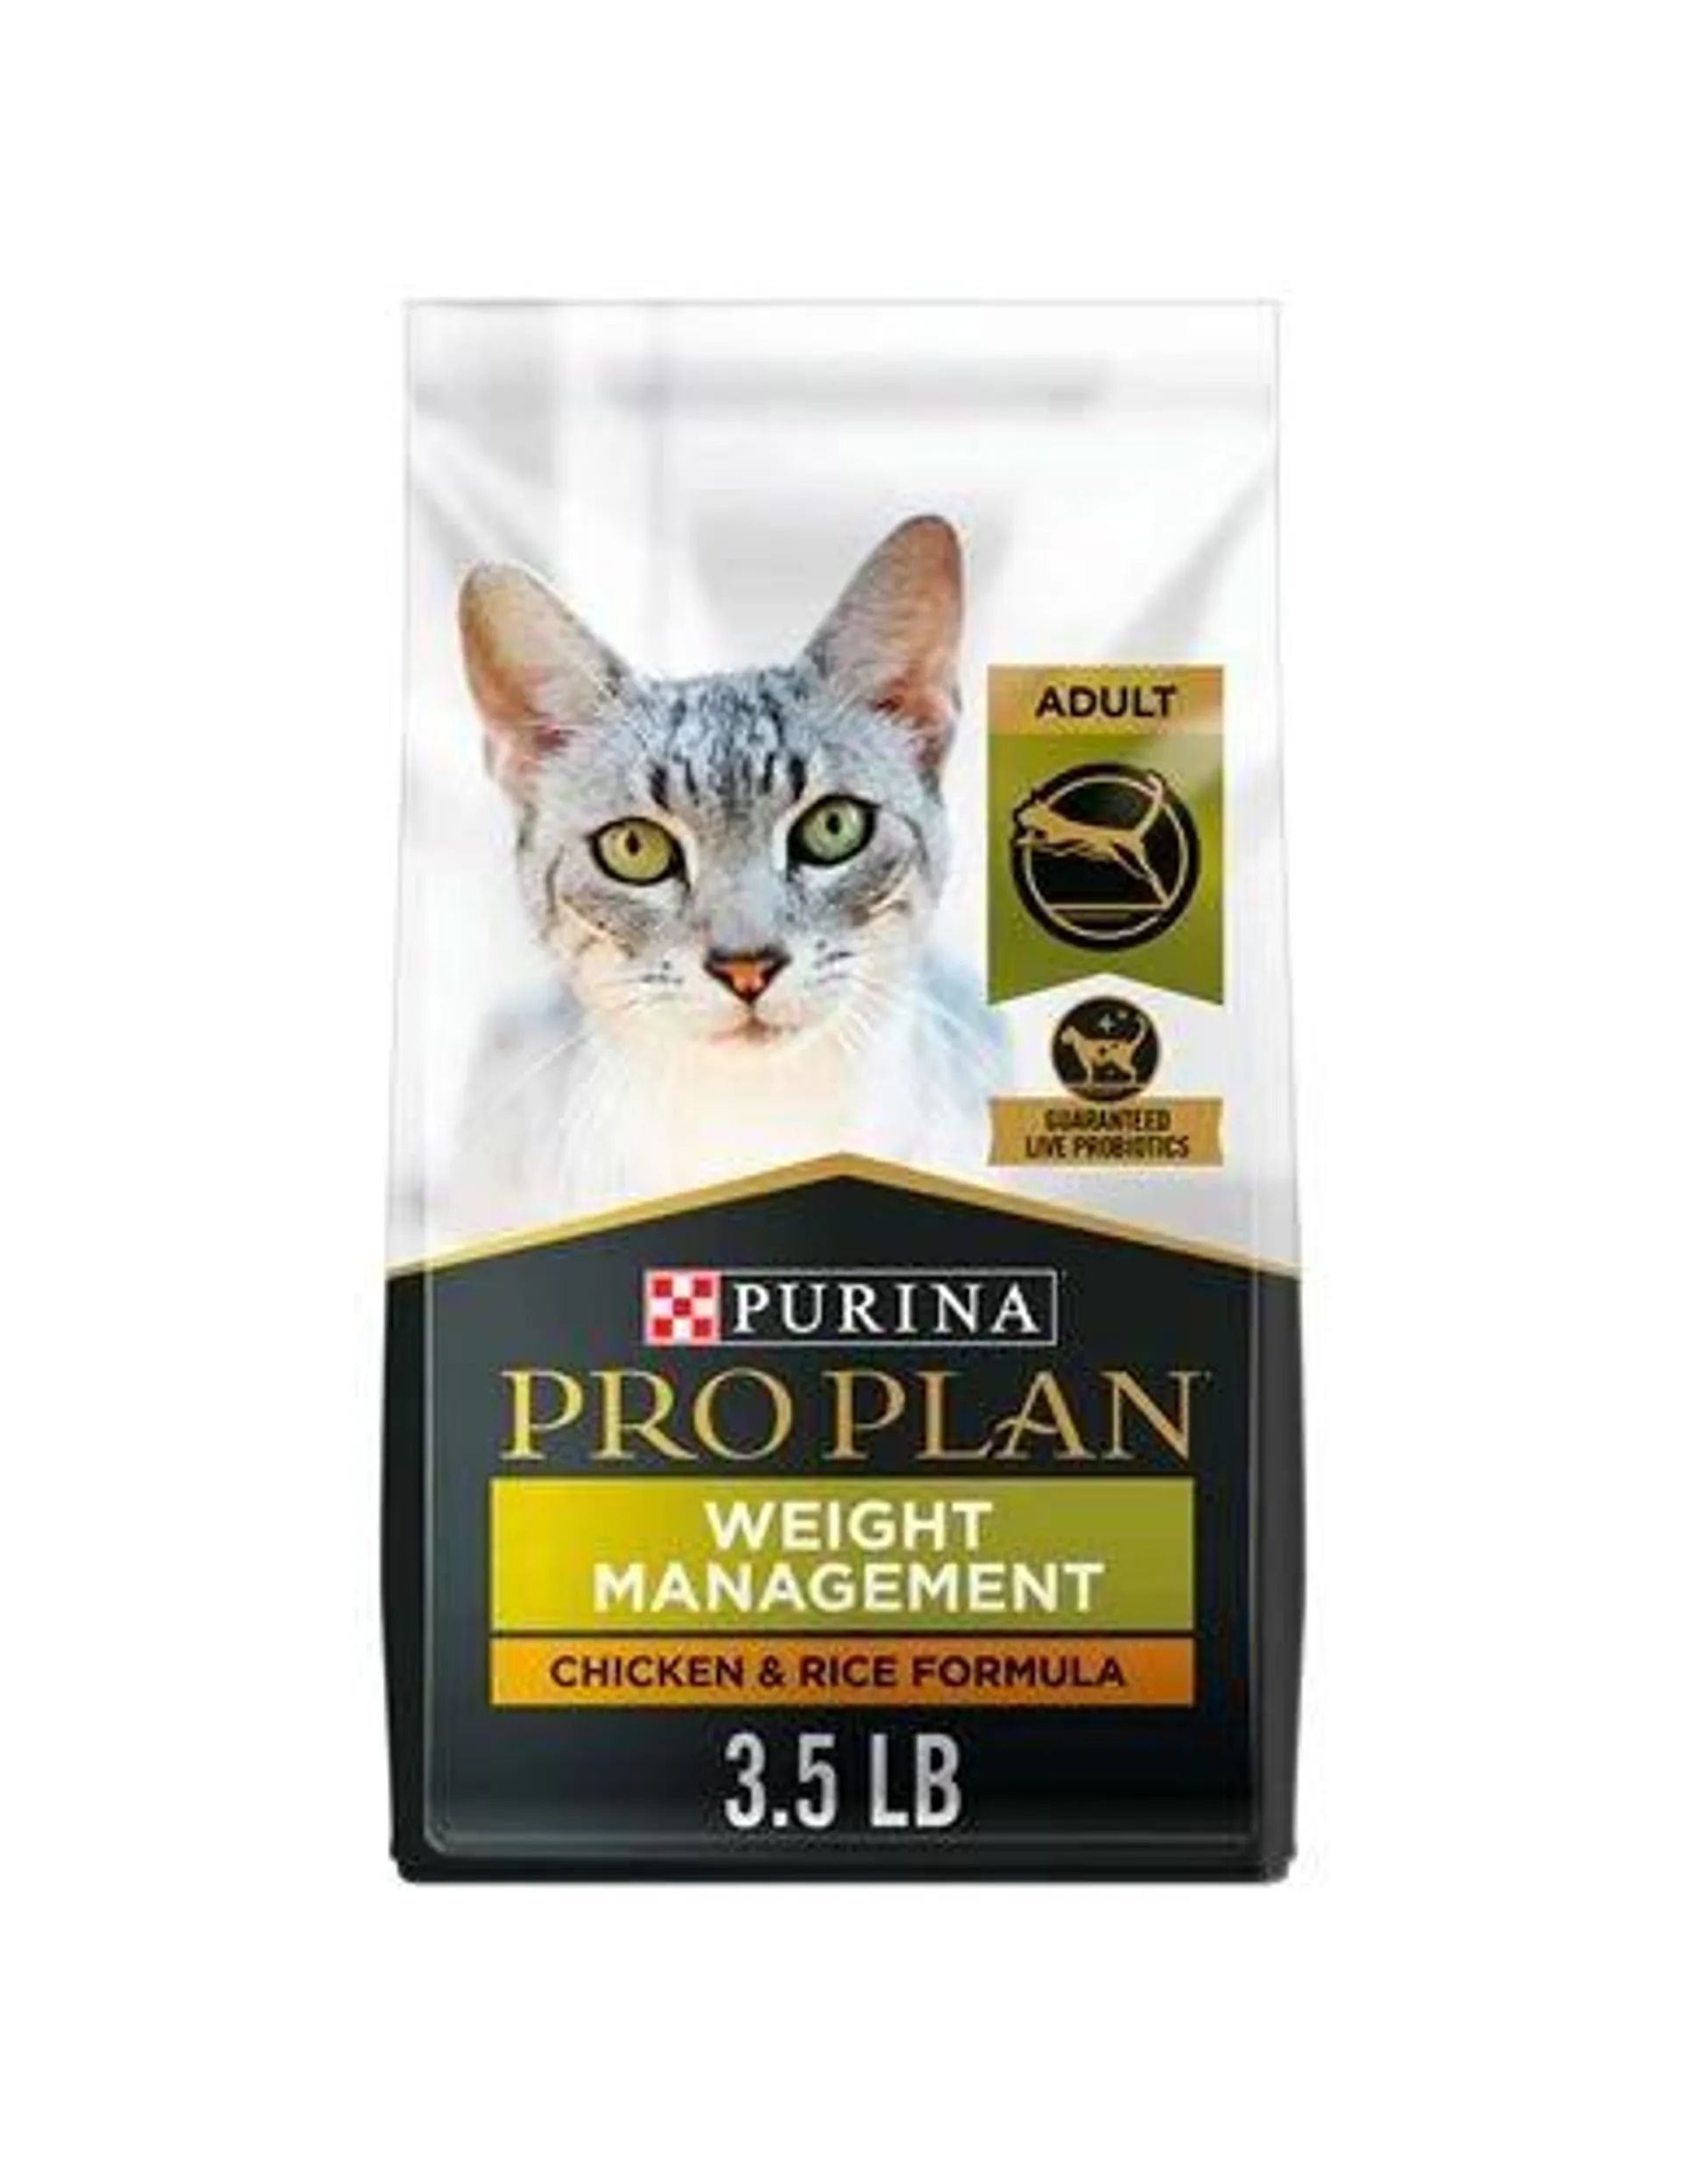 Purina Pro Plan Weight Control Dry Cat Food, Chicken and Rice Formula - 3.5 Pound Bag